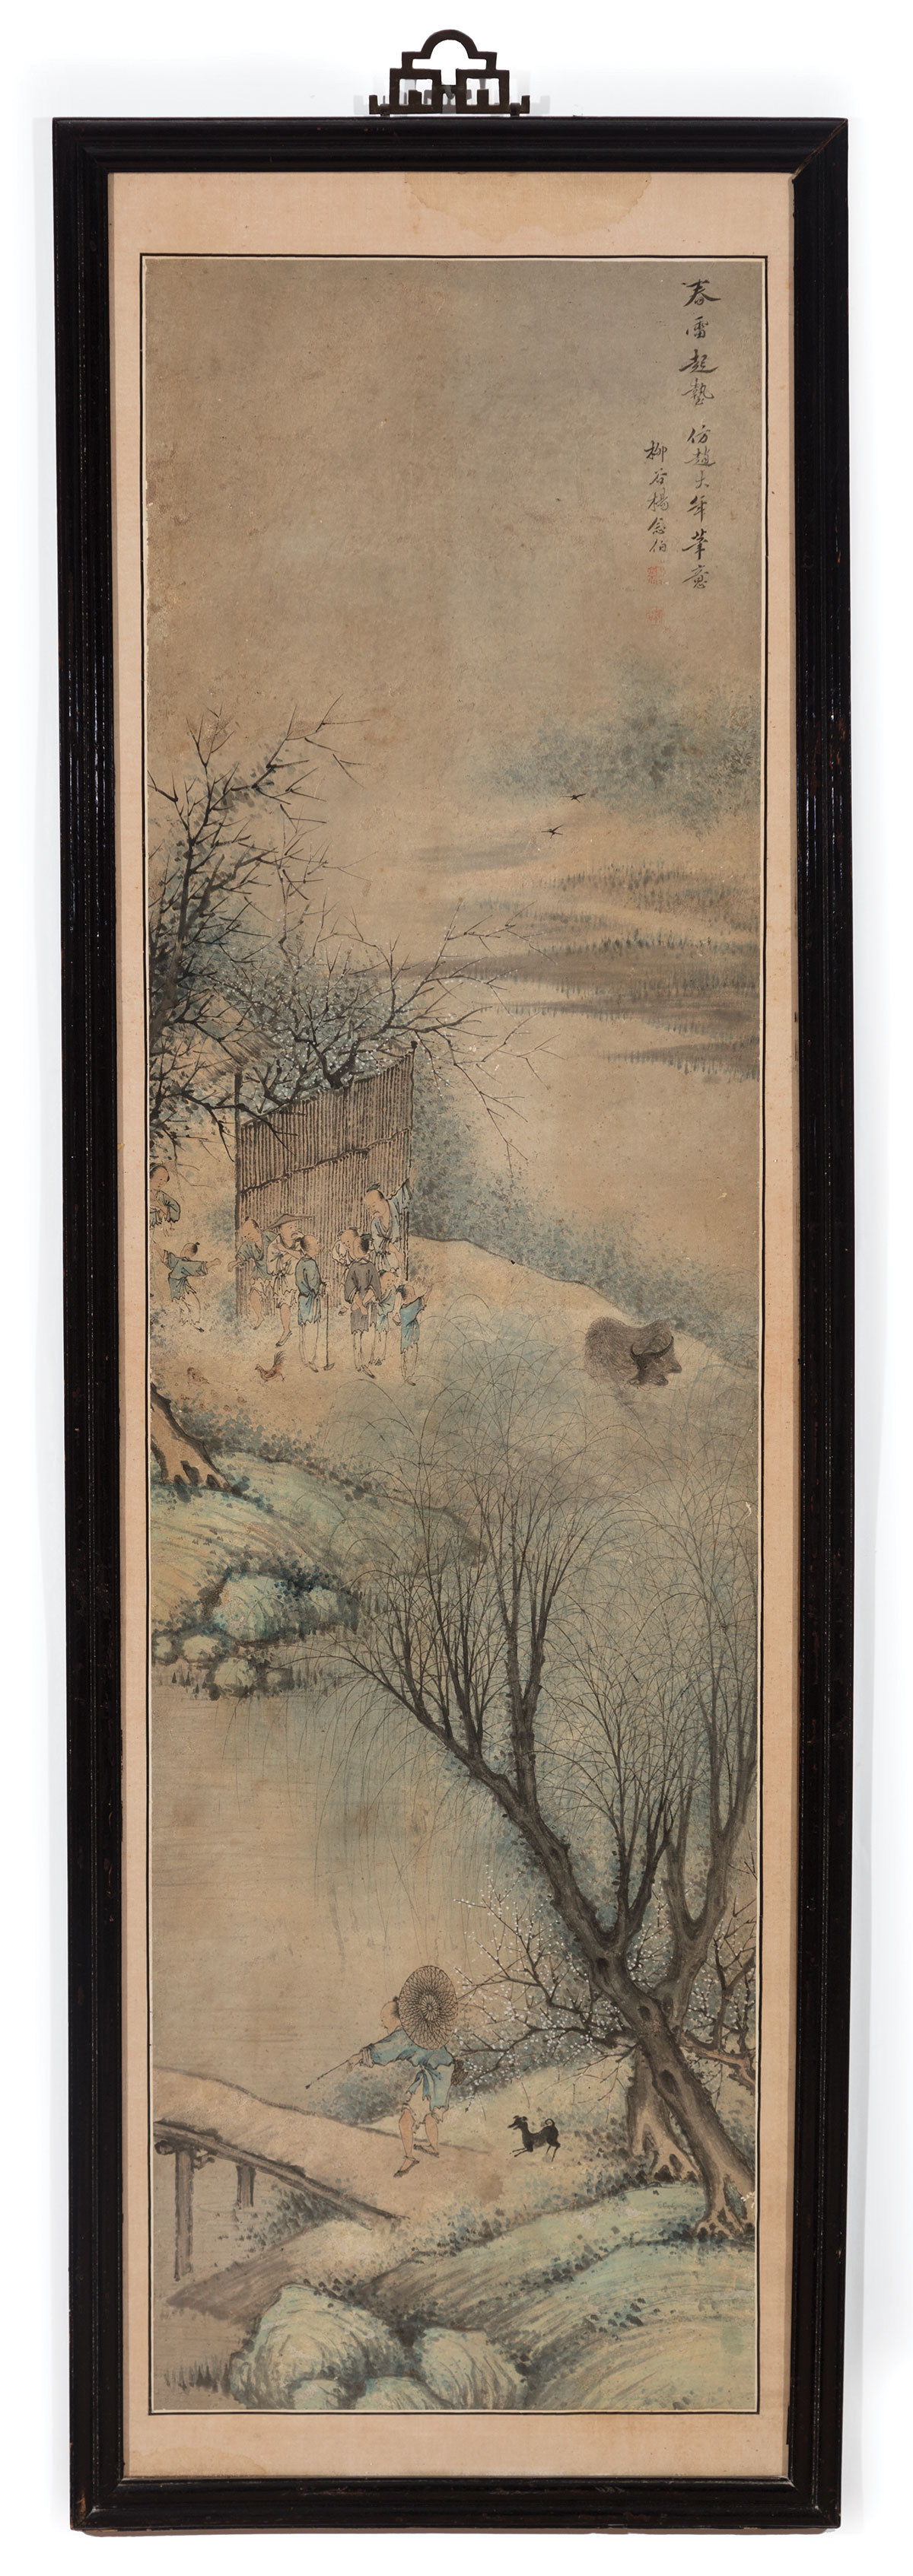 Yang Nianbo (Chinese, c. 1830-1890) , "Grateful for the Impending Spring Rain", ink and color on